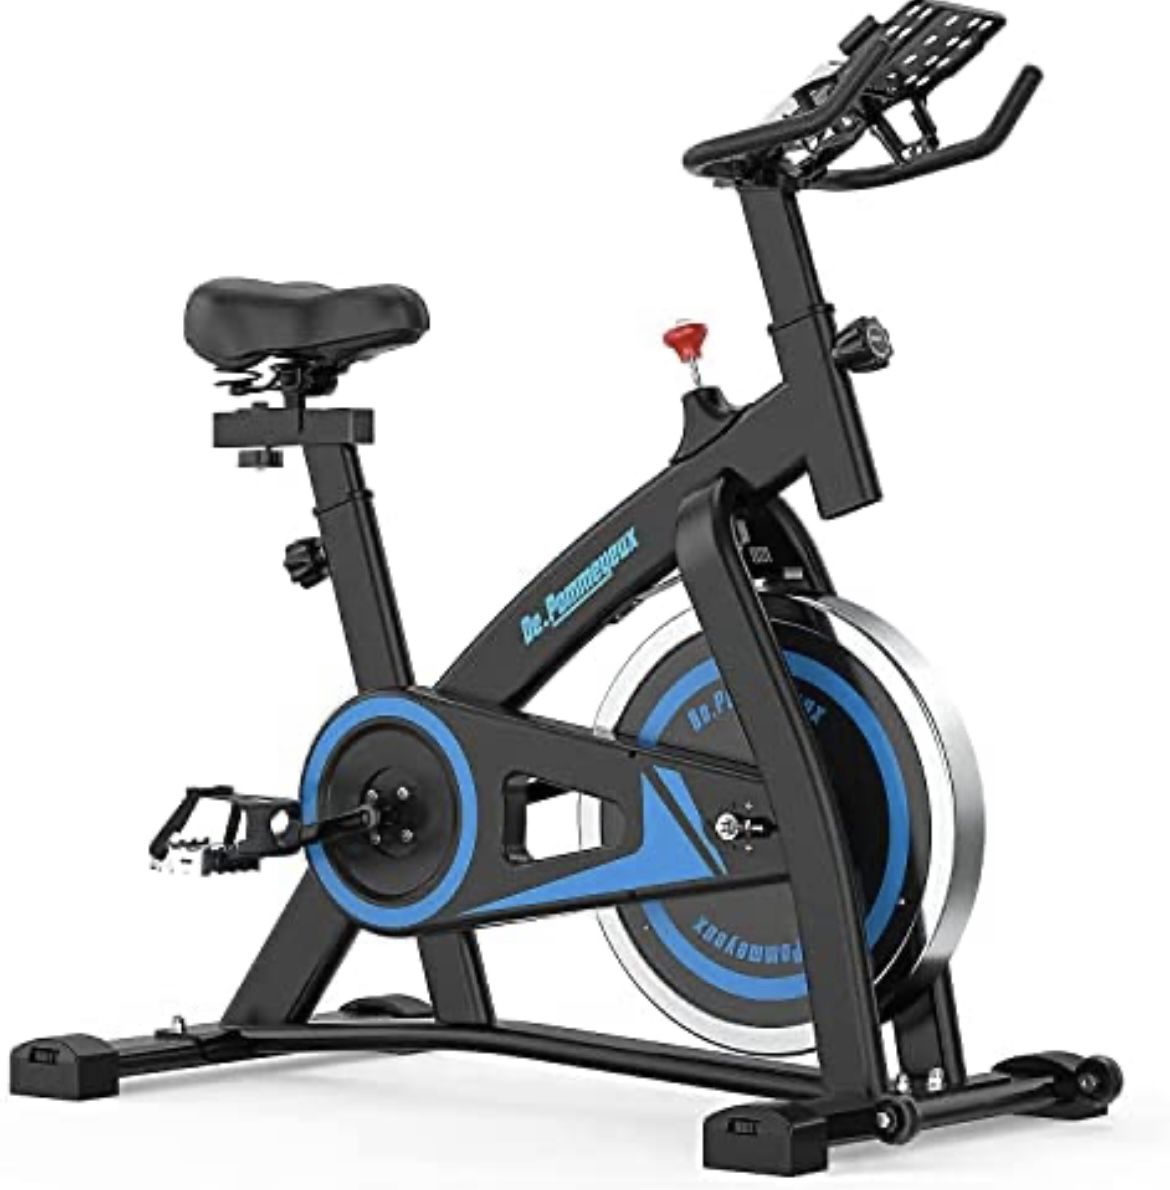 De.Pommeyeux Exercise Bike, Indoor Cycling Bike Stationary with 35 Lbs Flywheel, Workout Bike Fitness Bikes for Home Cardio with Comfortable Seat, Sil